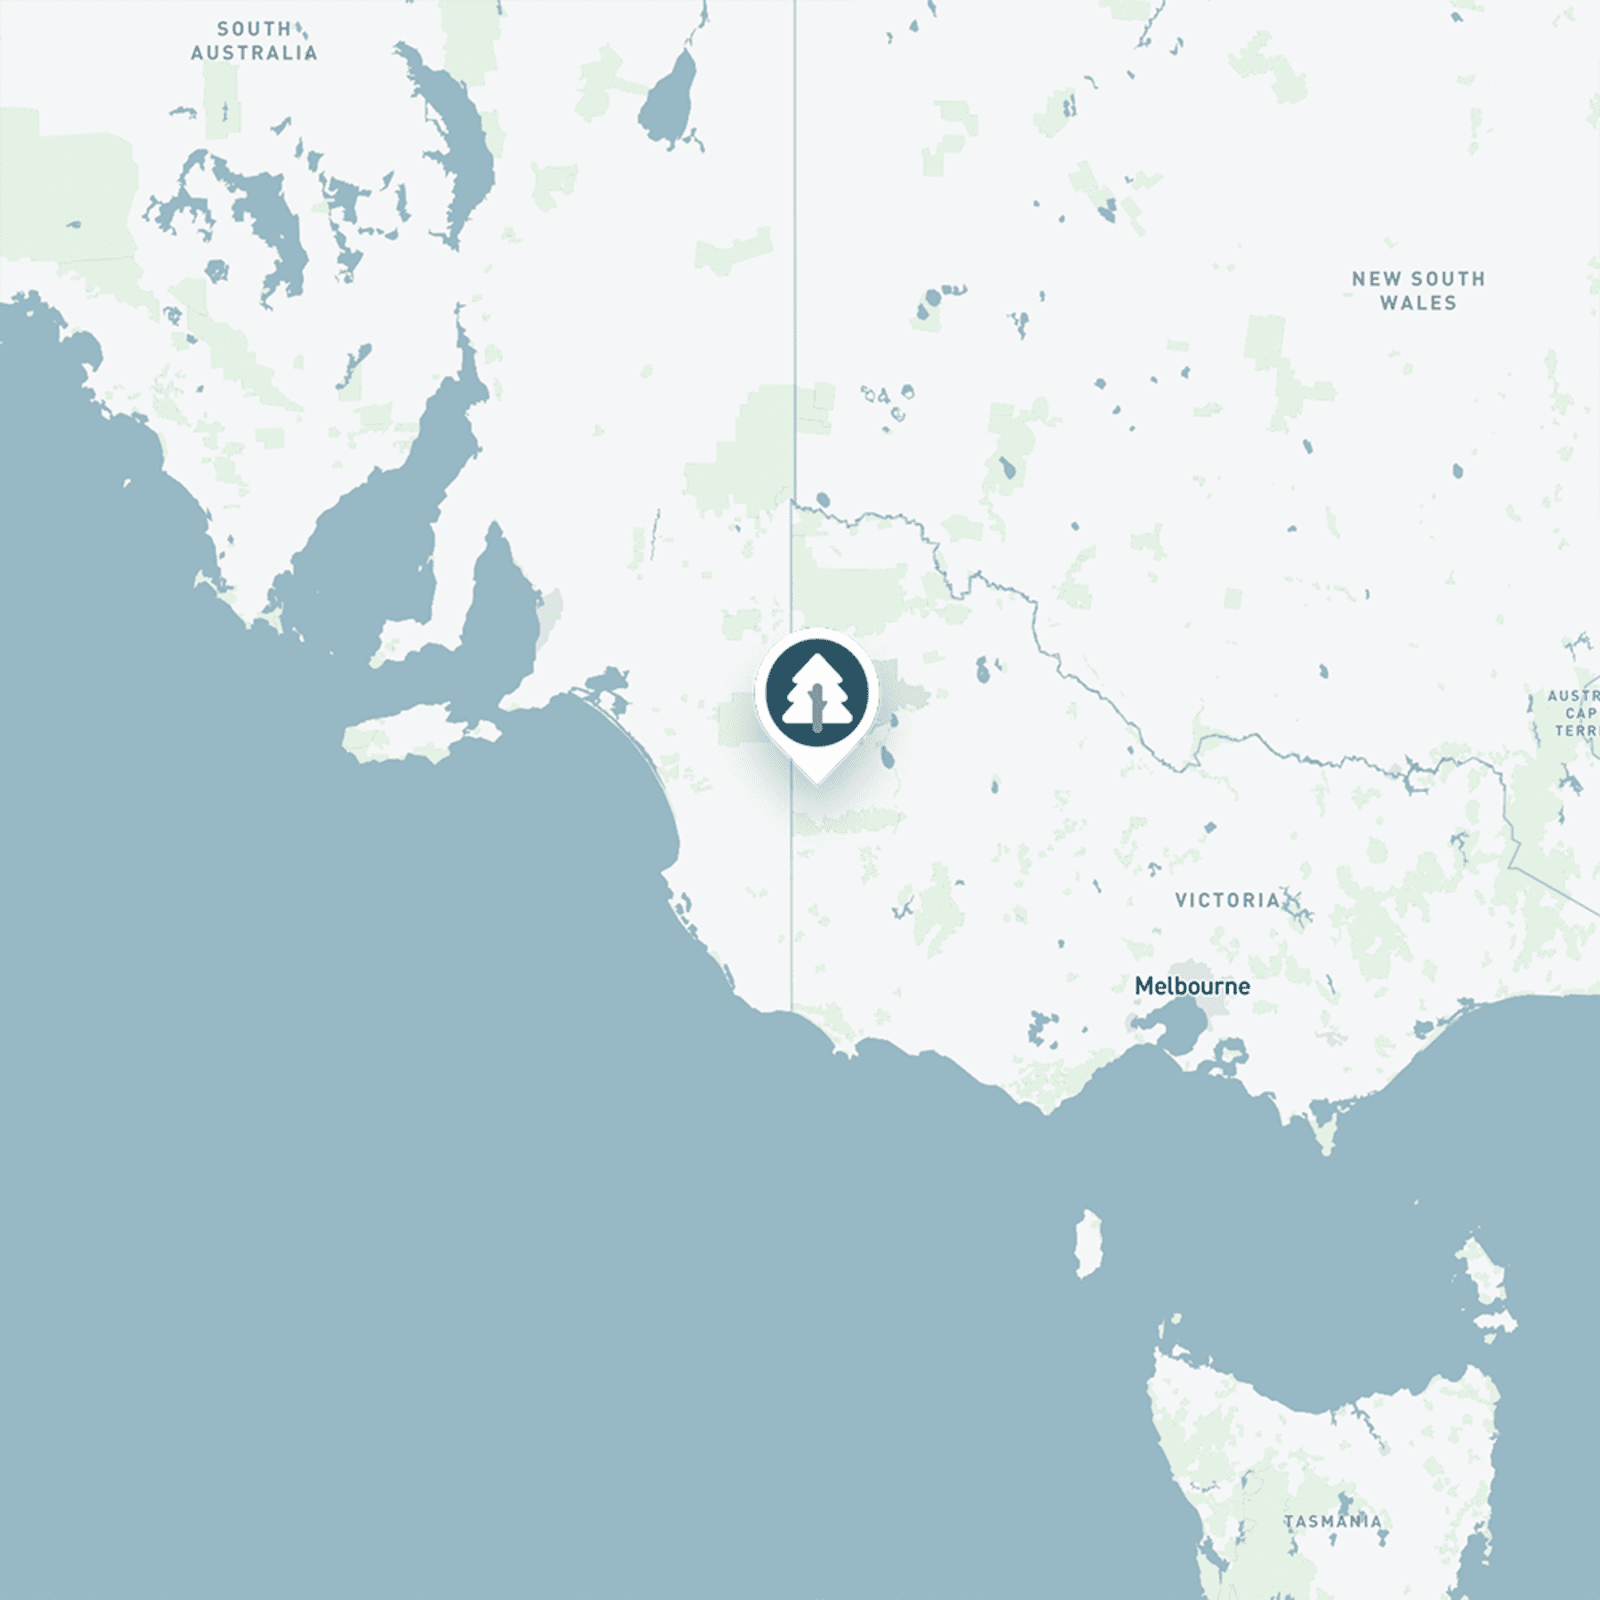 Map of Australia showing the location of a reforestation project